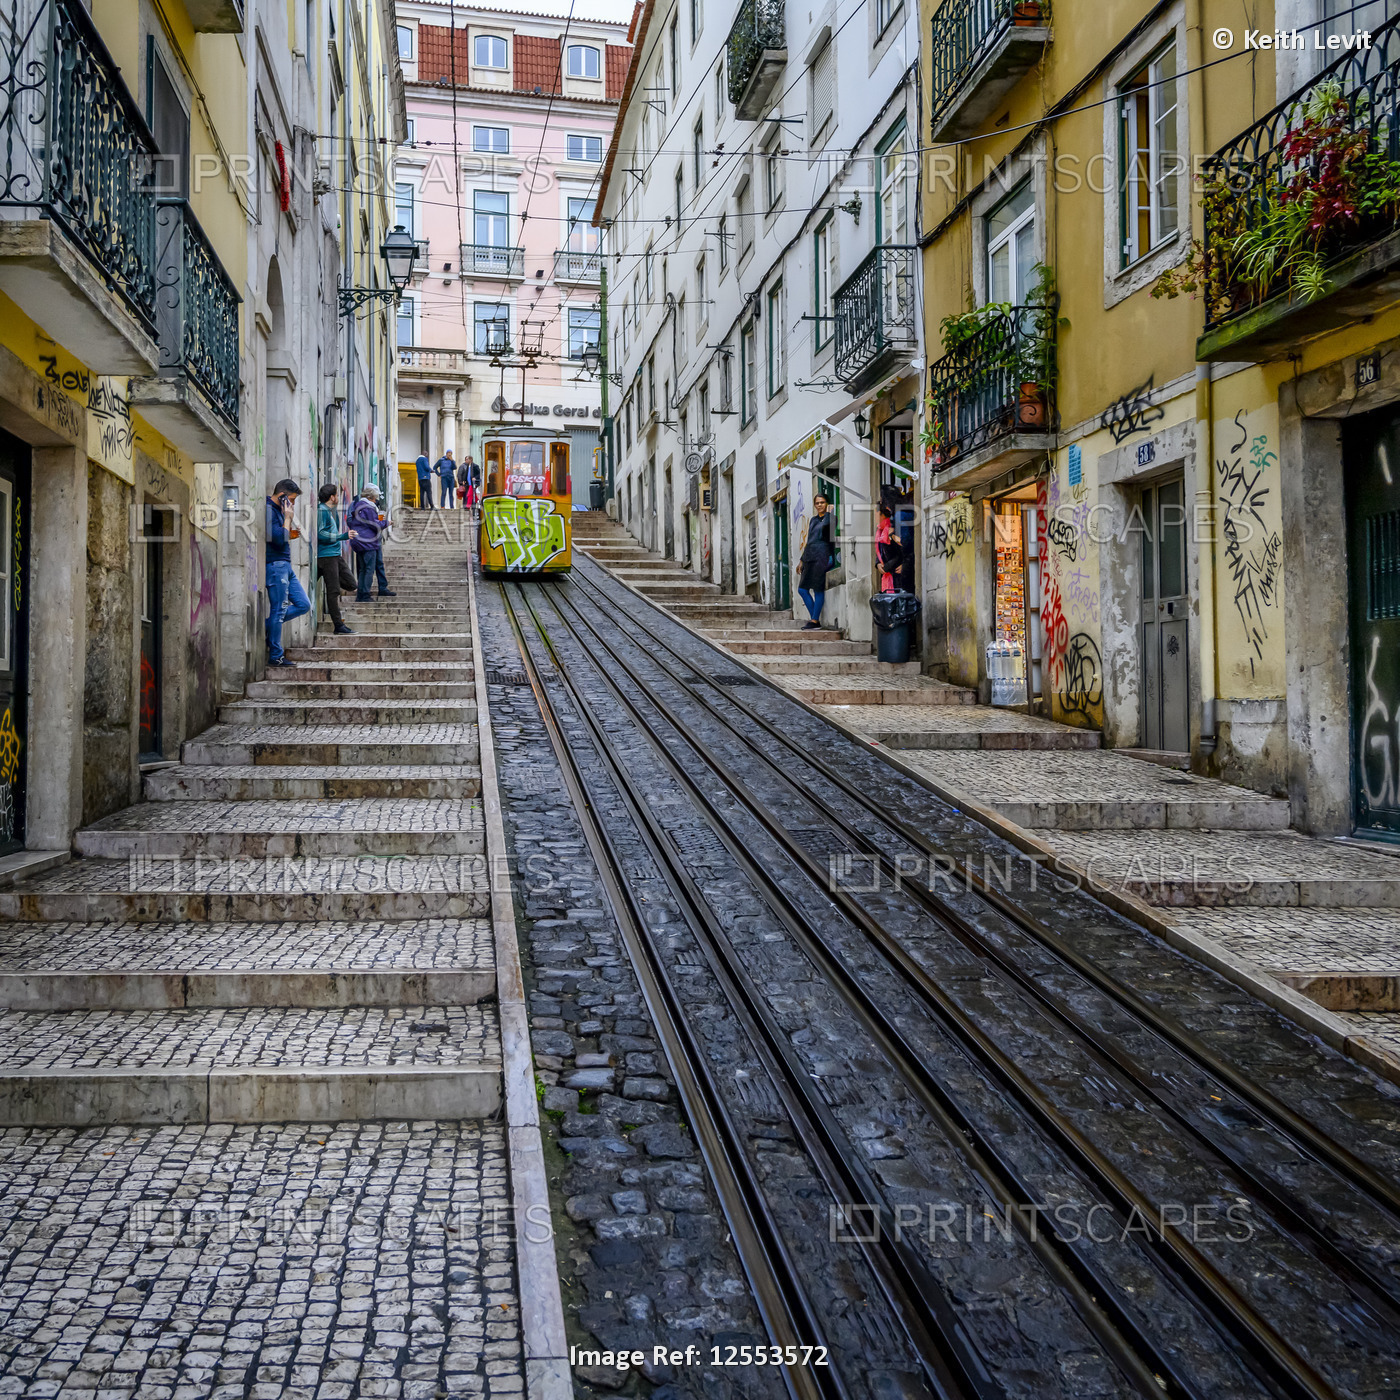 City Life in Lisbon, with a street car and people waiting outside buildings ...